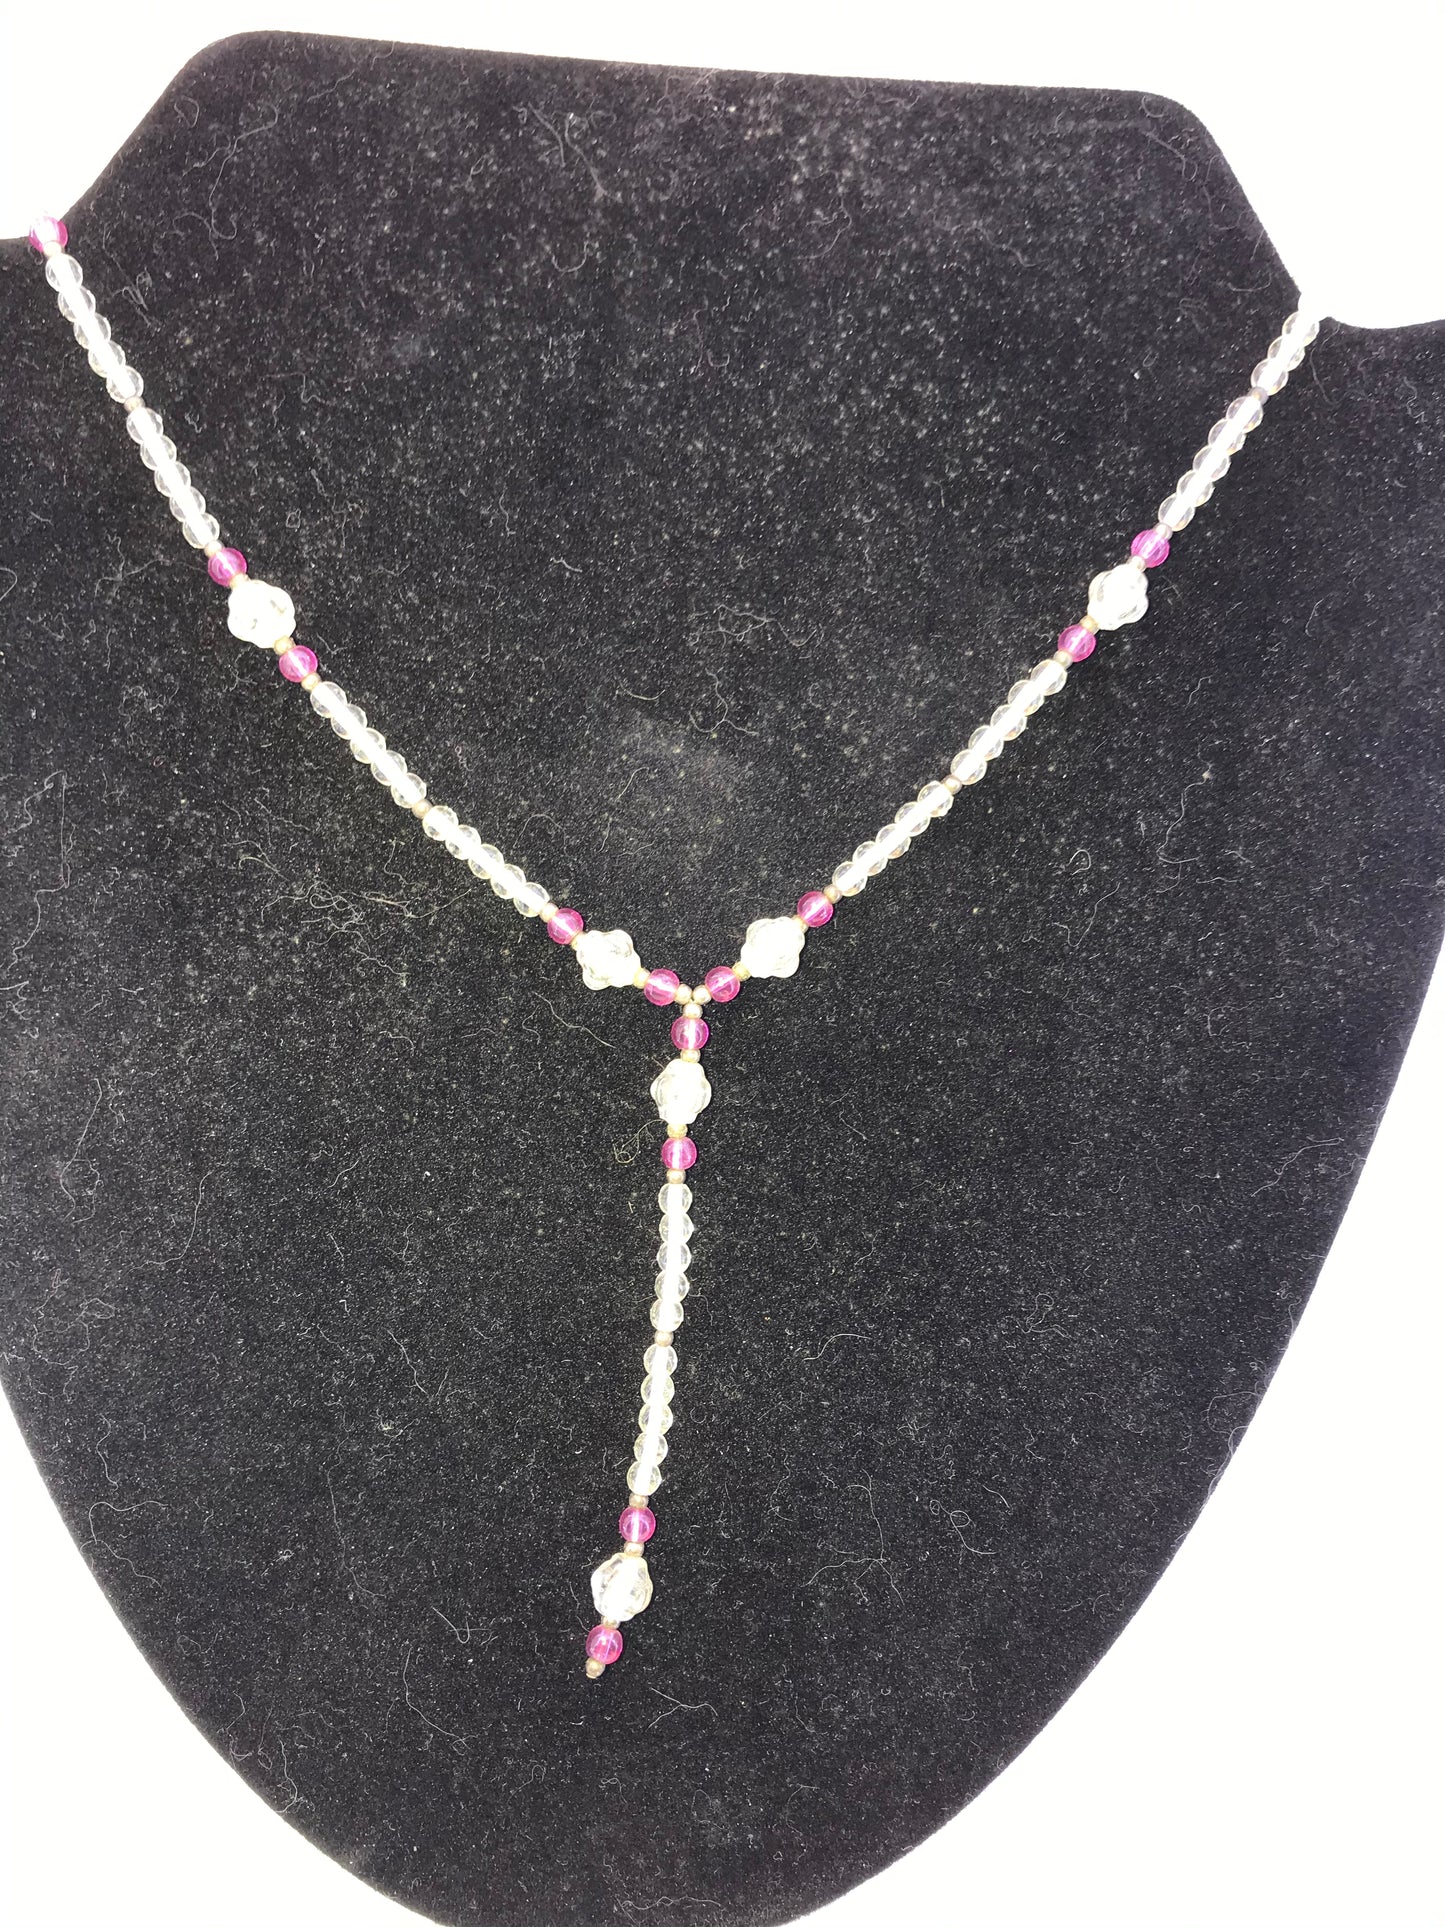 16 1/2" Purple and Clear Beaded Necklace Set